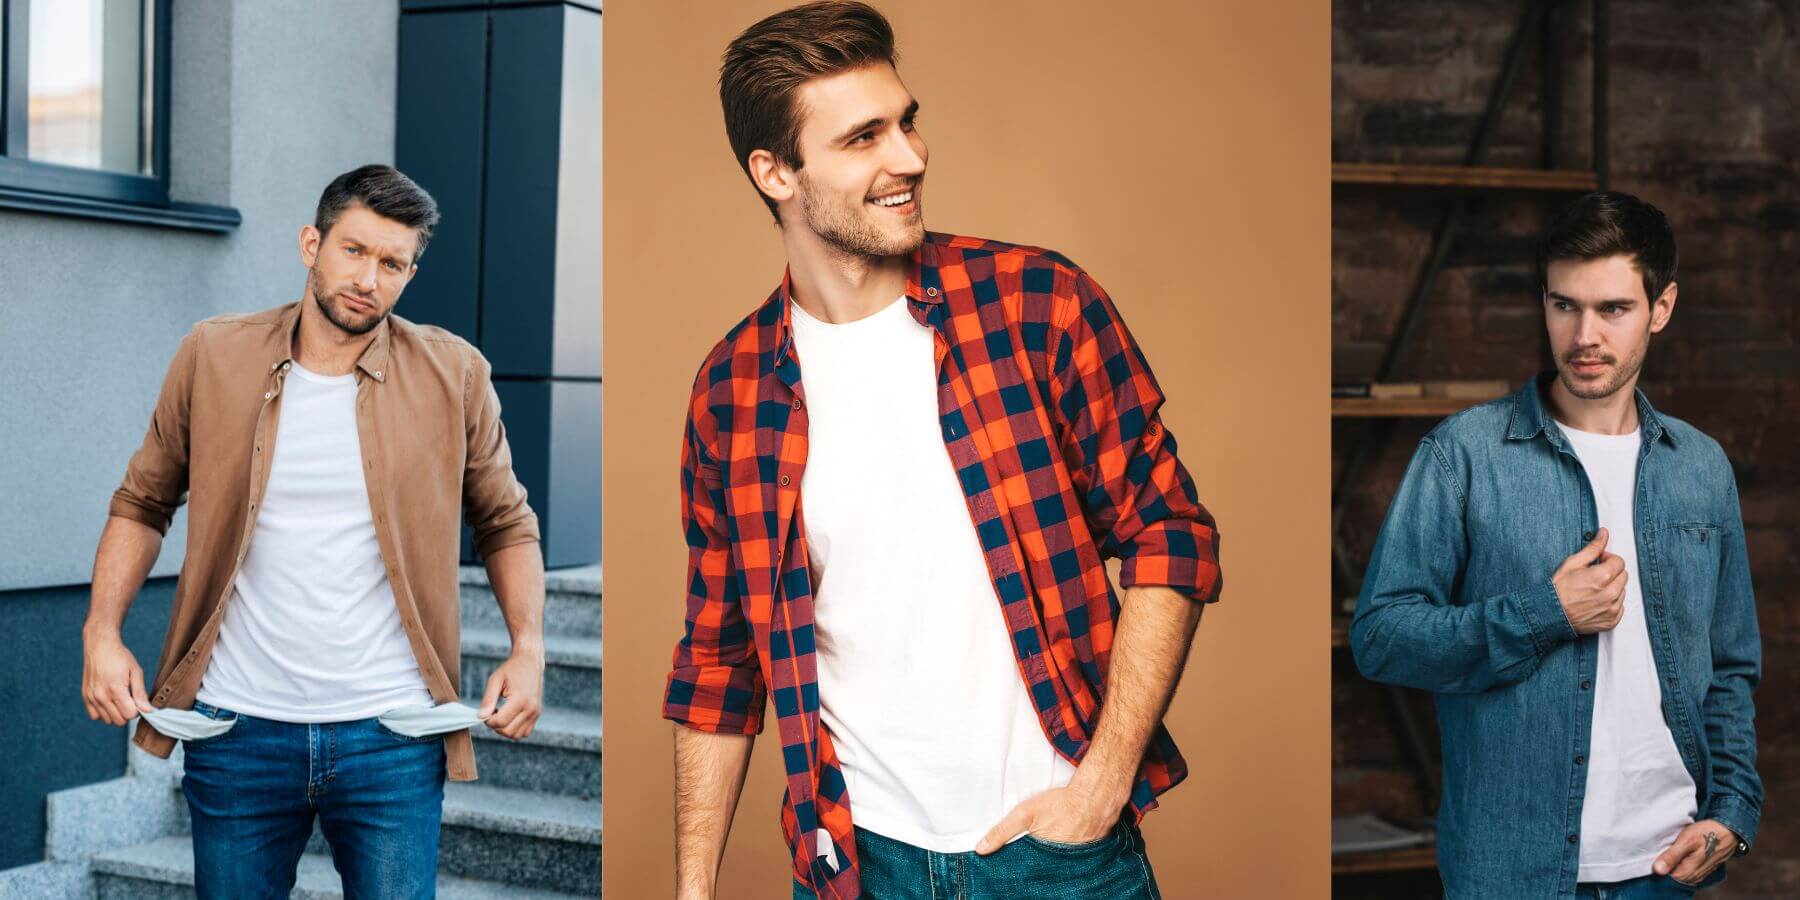 Shirt and T-shirt Combinations for a Men